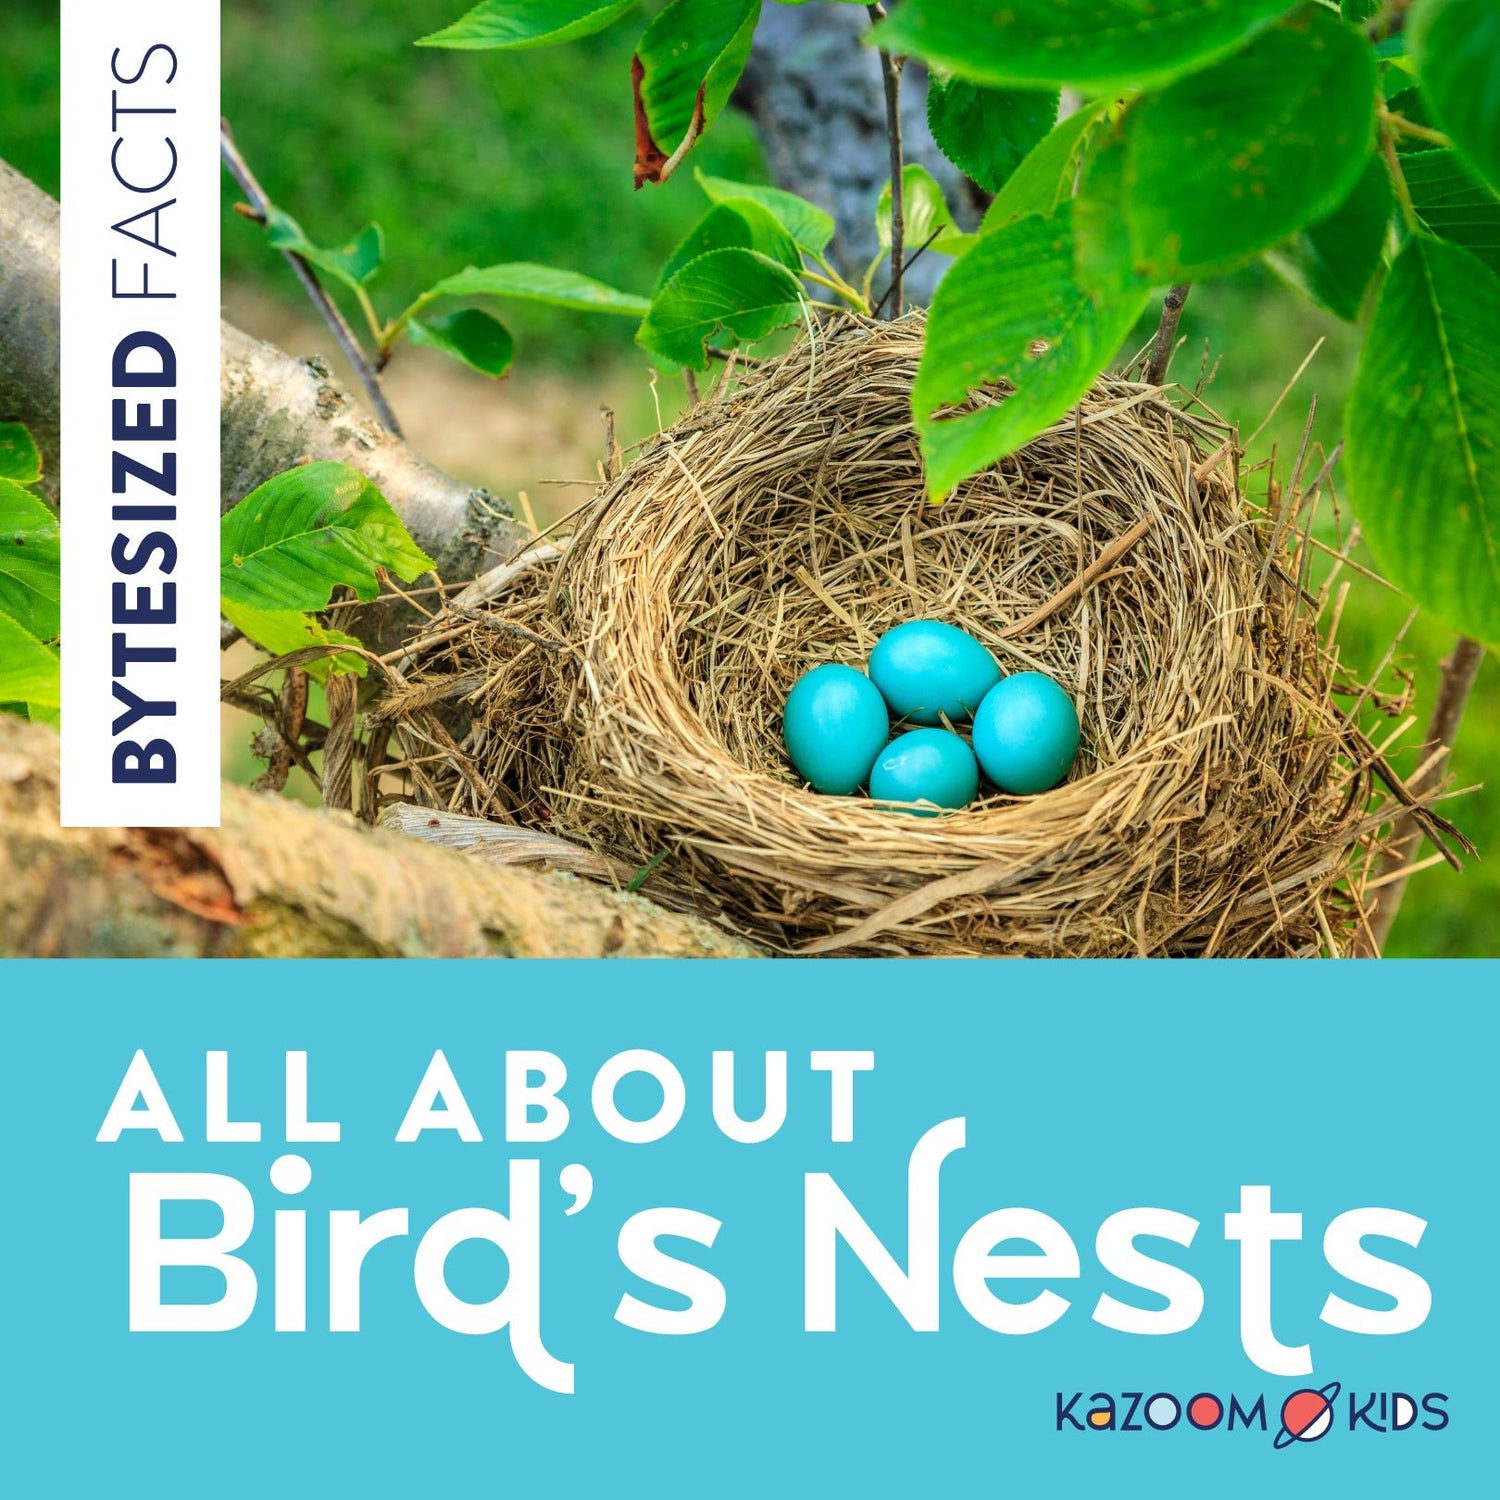 All about Bird's Nests